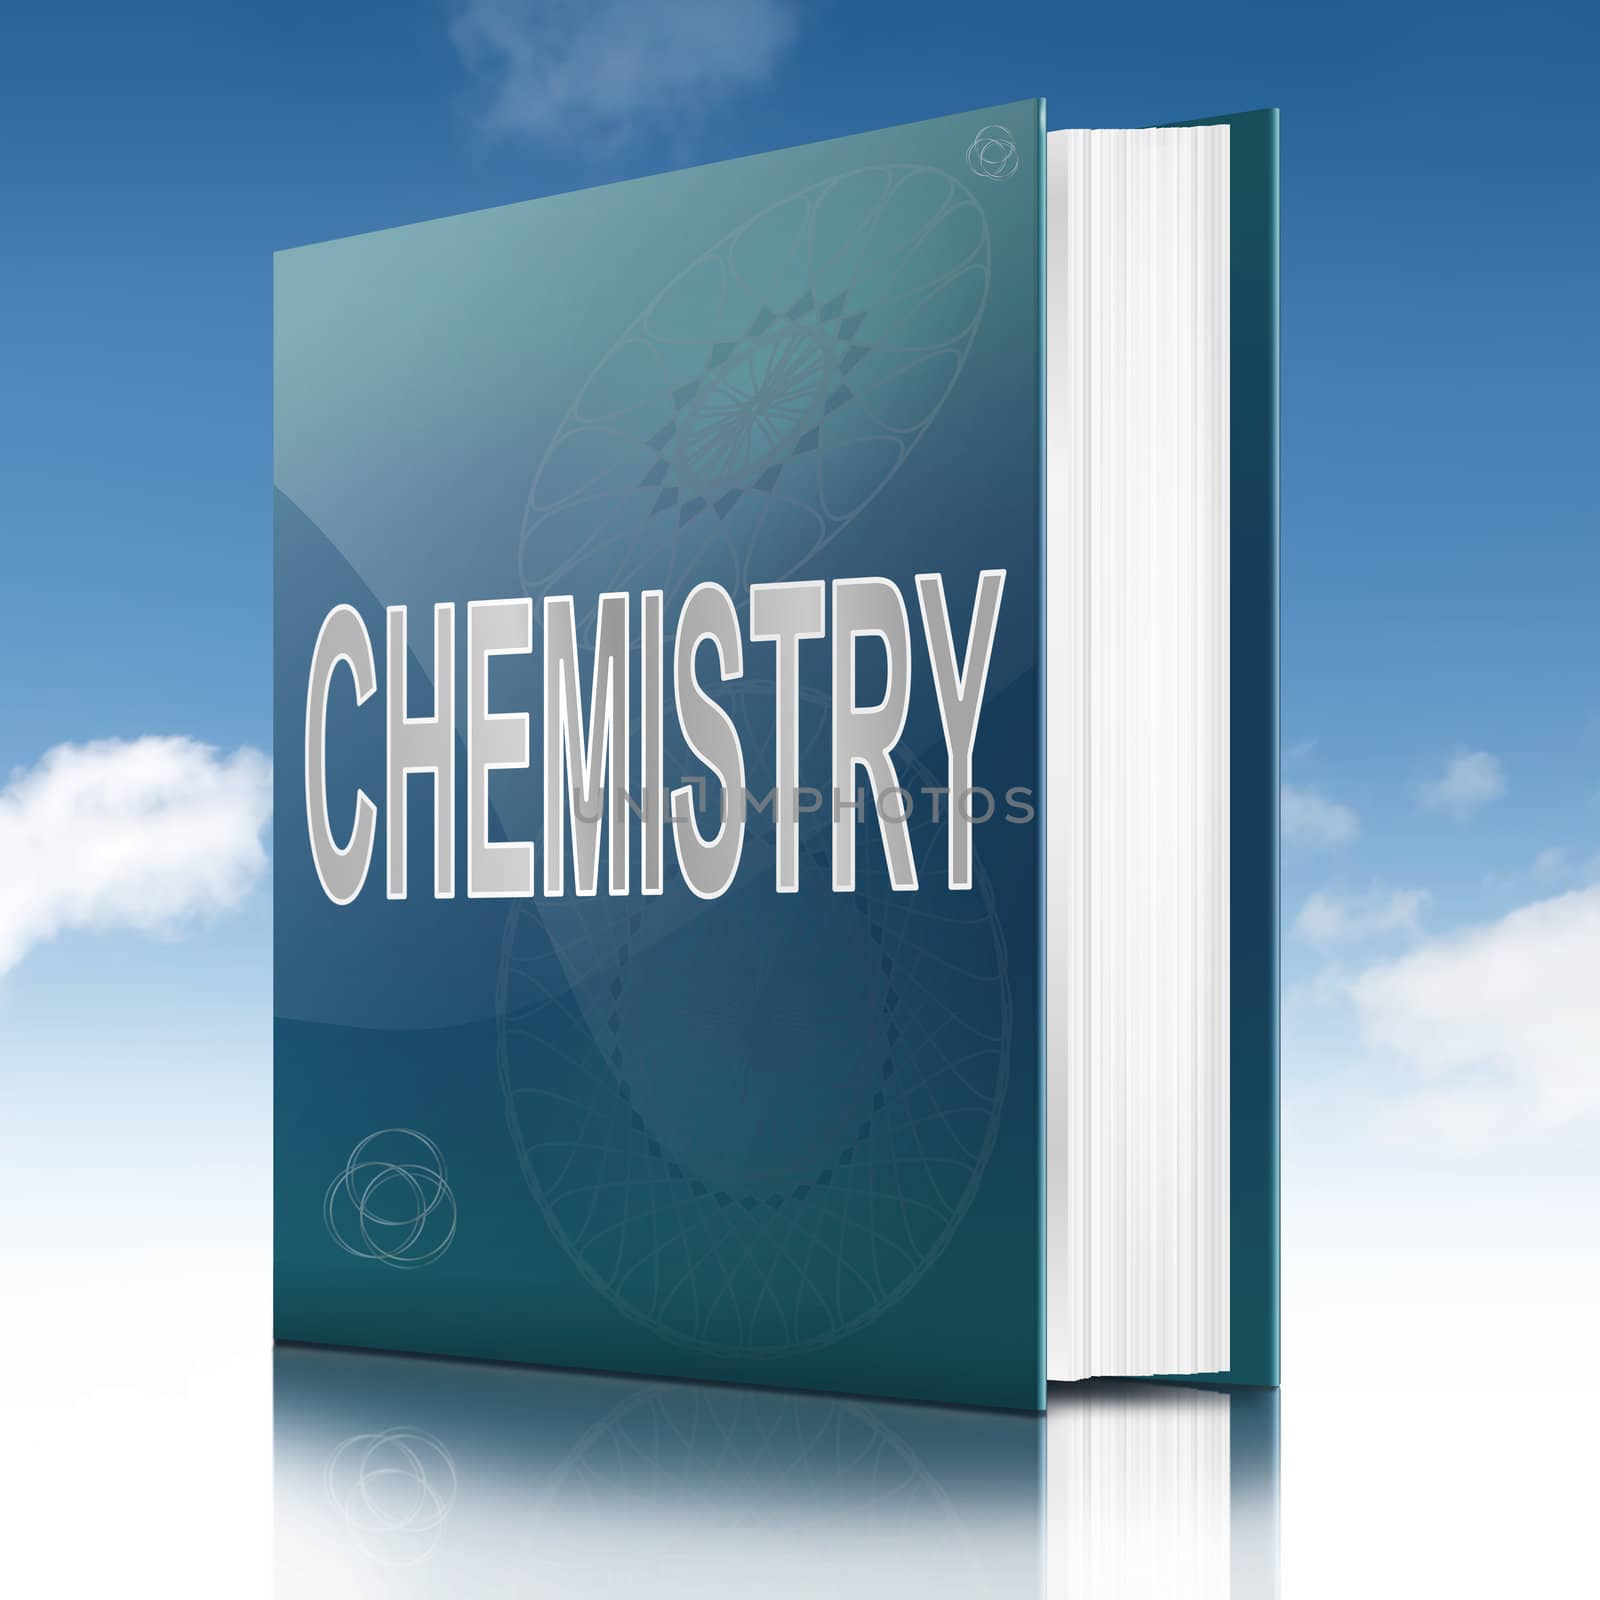 Illustration depicting a text book with a Chemistry title. White background.